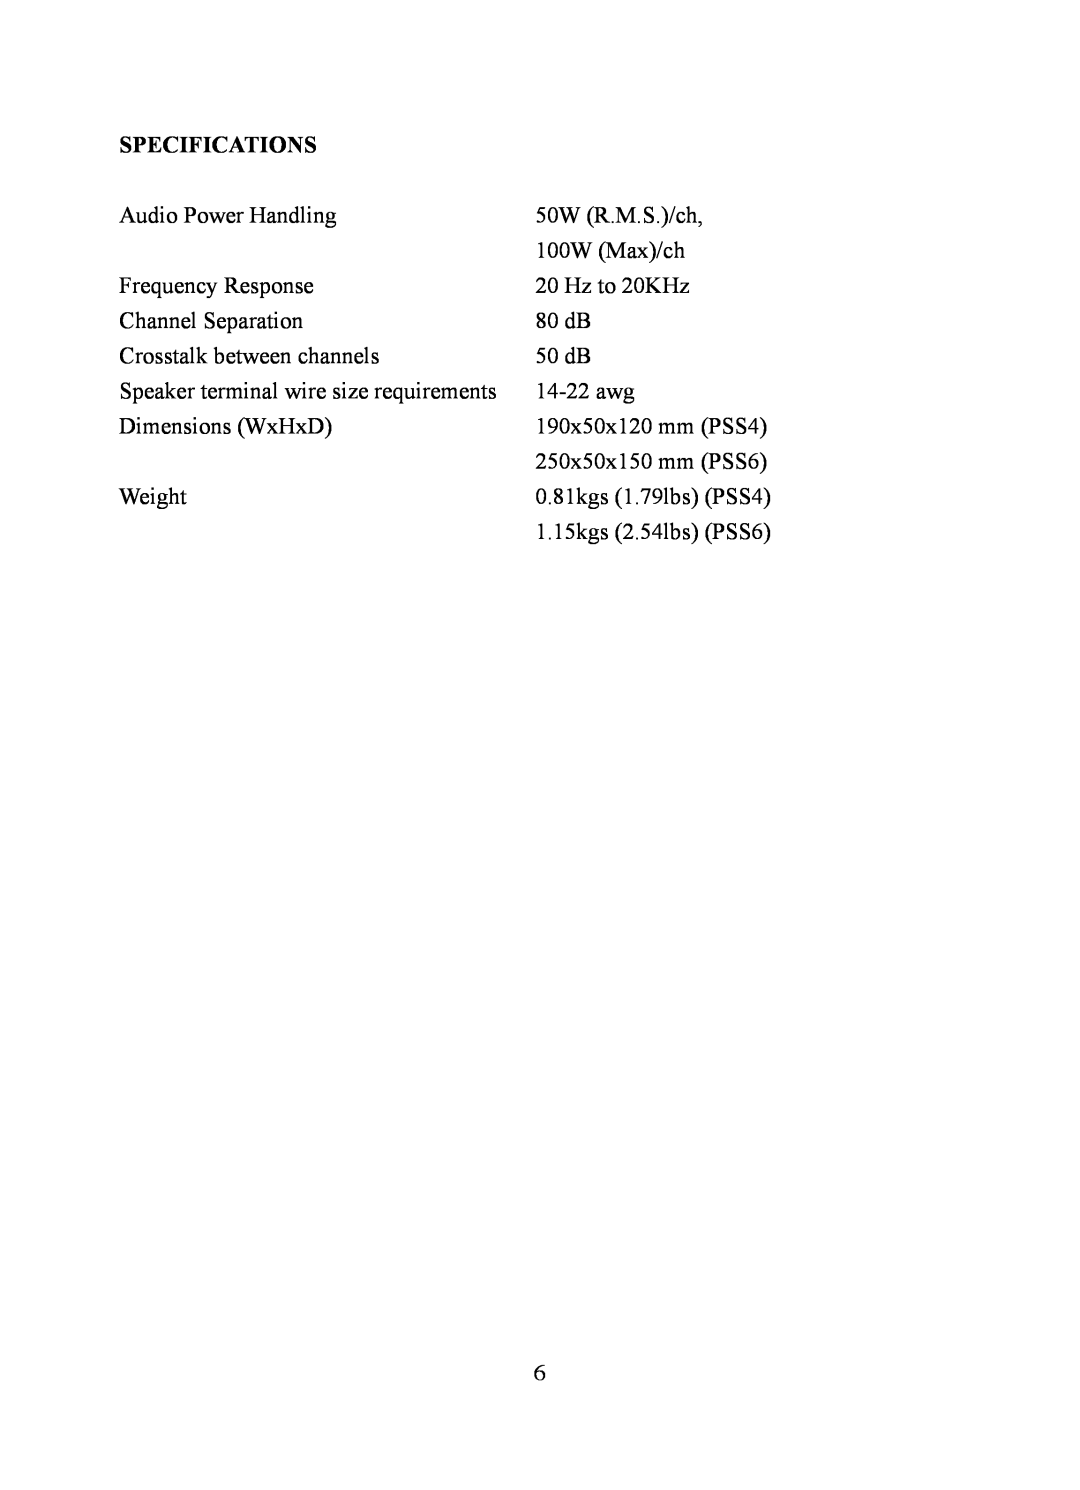 PYLE Audio PSS4, PSS6 manual Specifications 